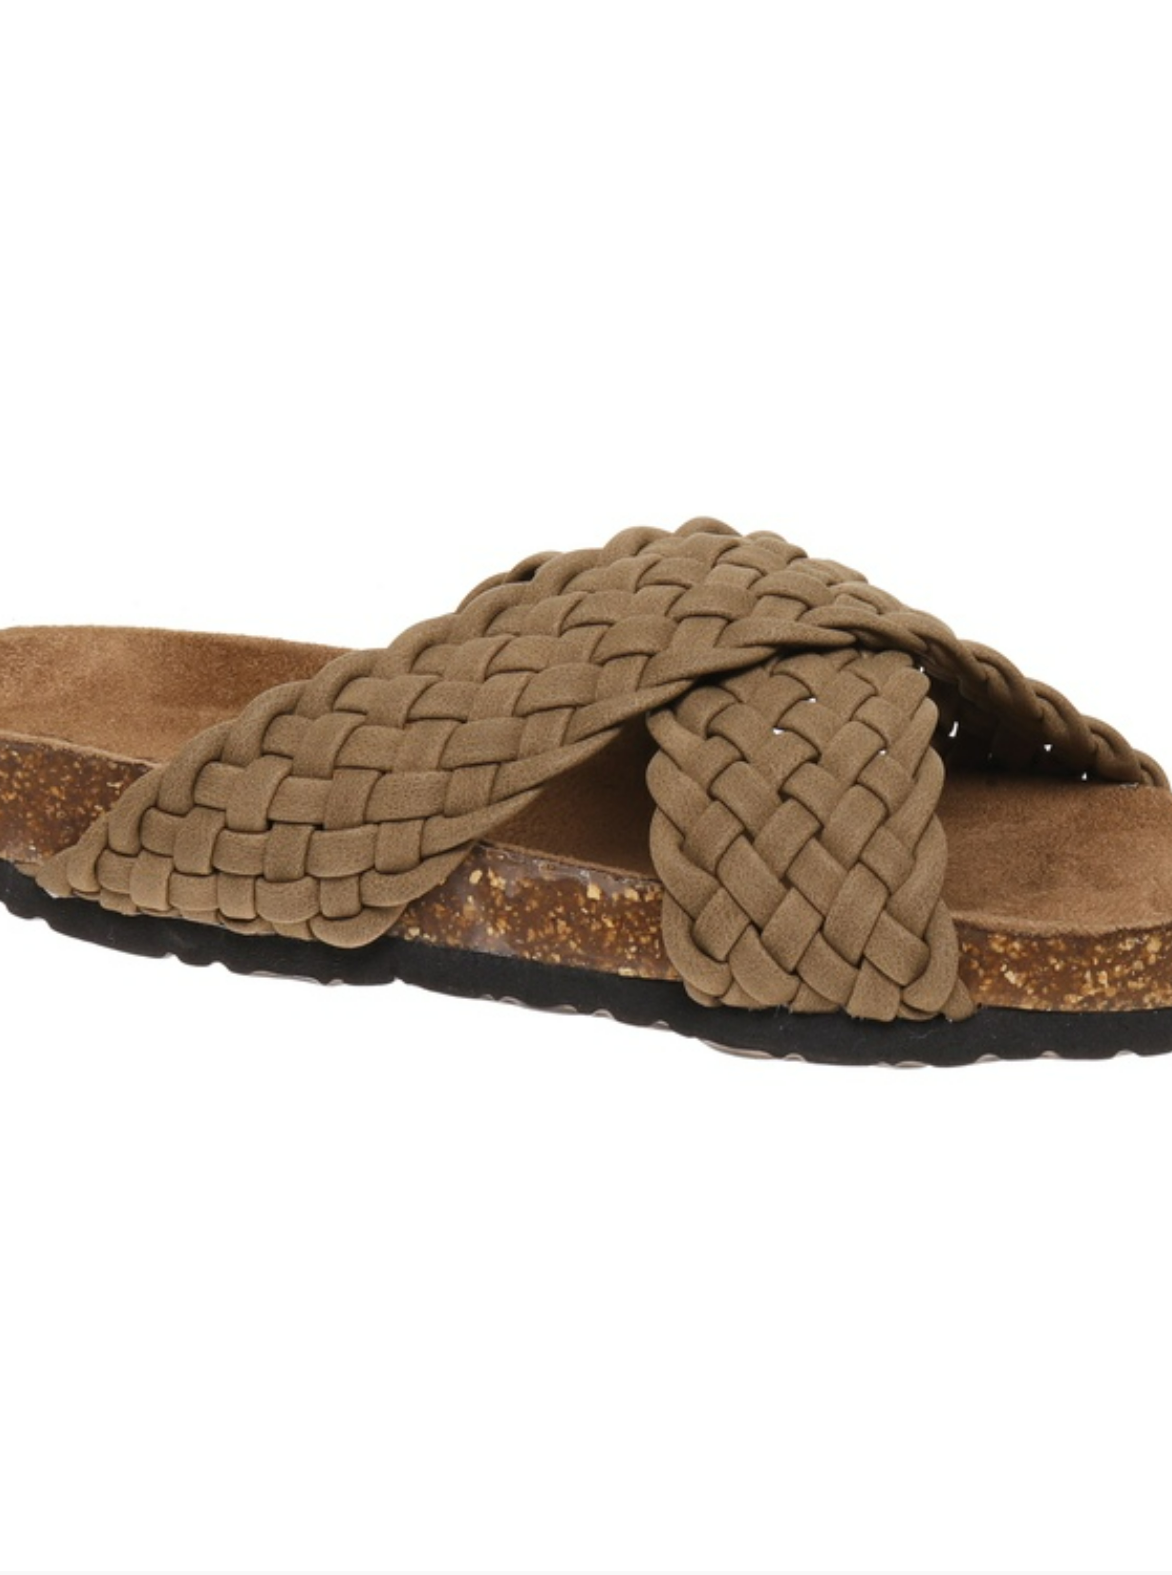 Outwood Bork Slip-on Sandal with Braided Straps in Taupe- Final Sale    Shoes Olem Shoe Corp- Tilden Co.